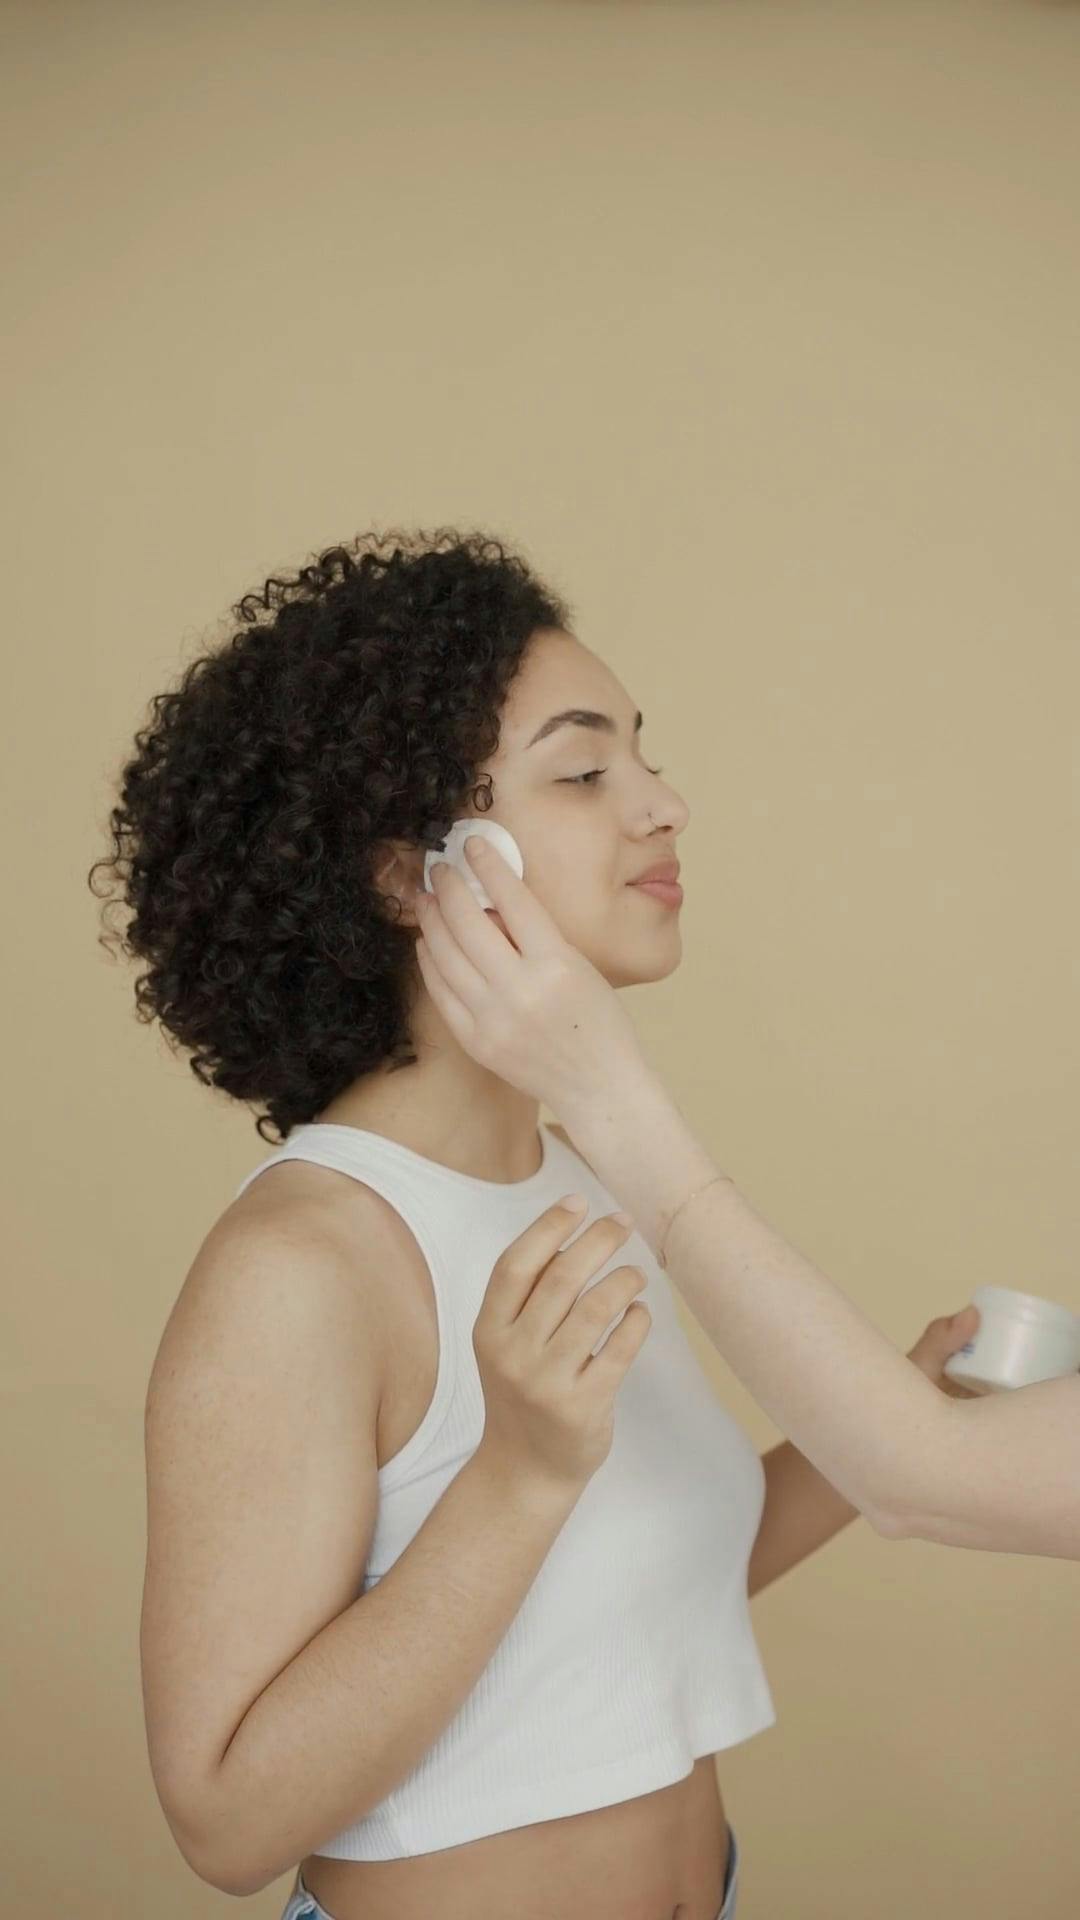 Woman Applying Foundation On Her Face · Free Stock Video